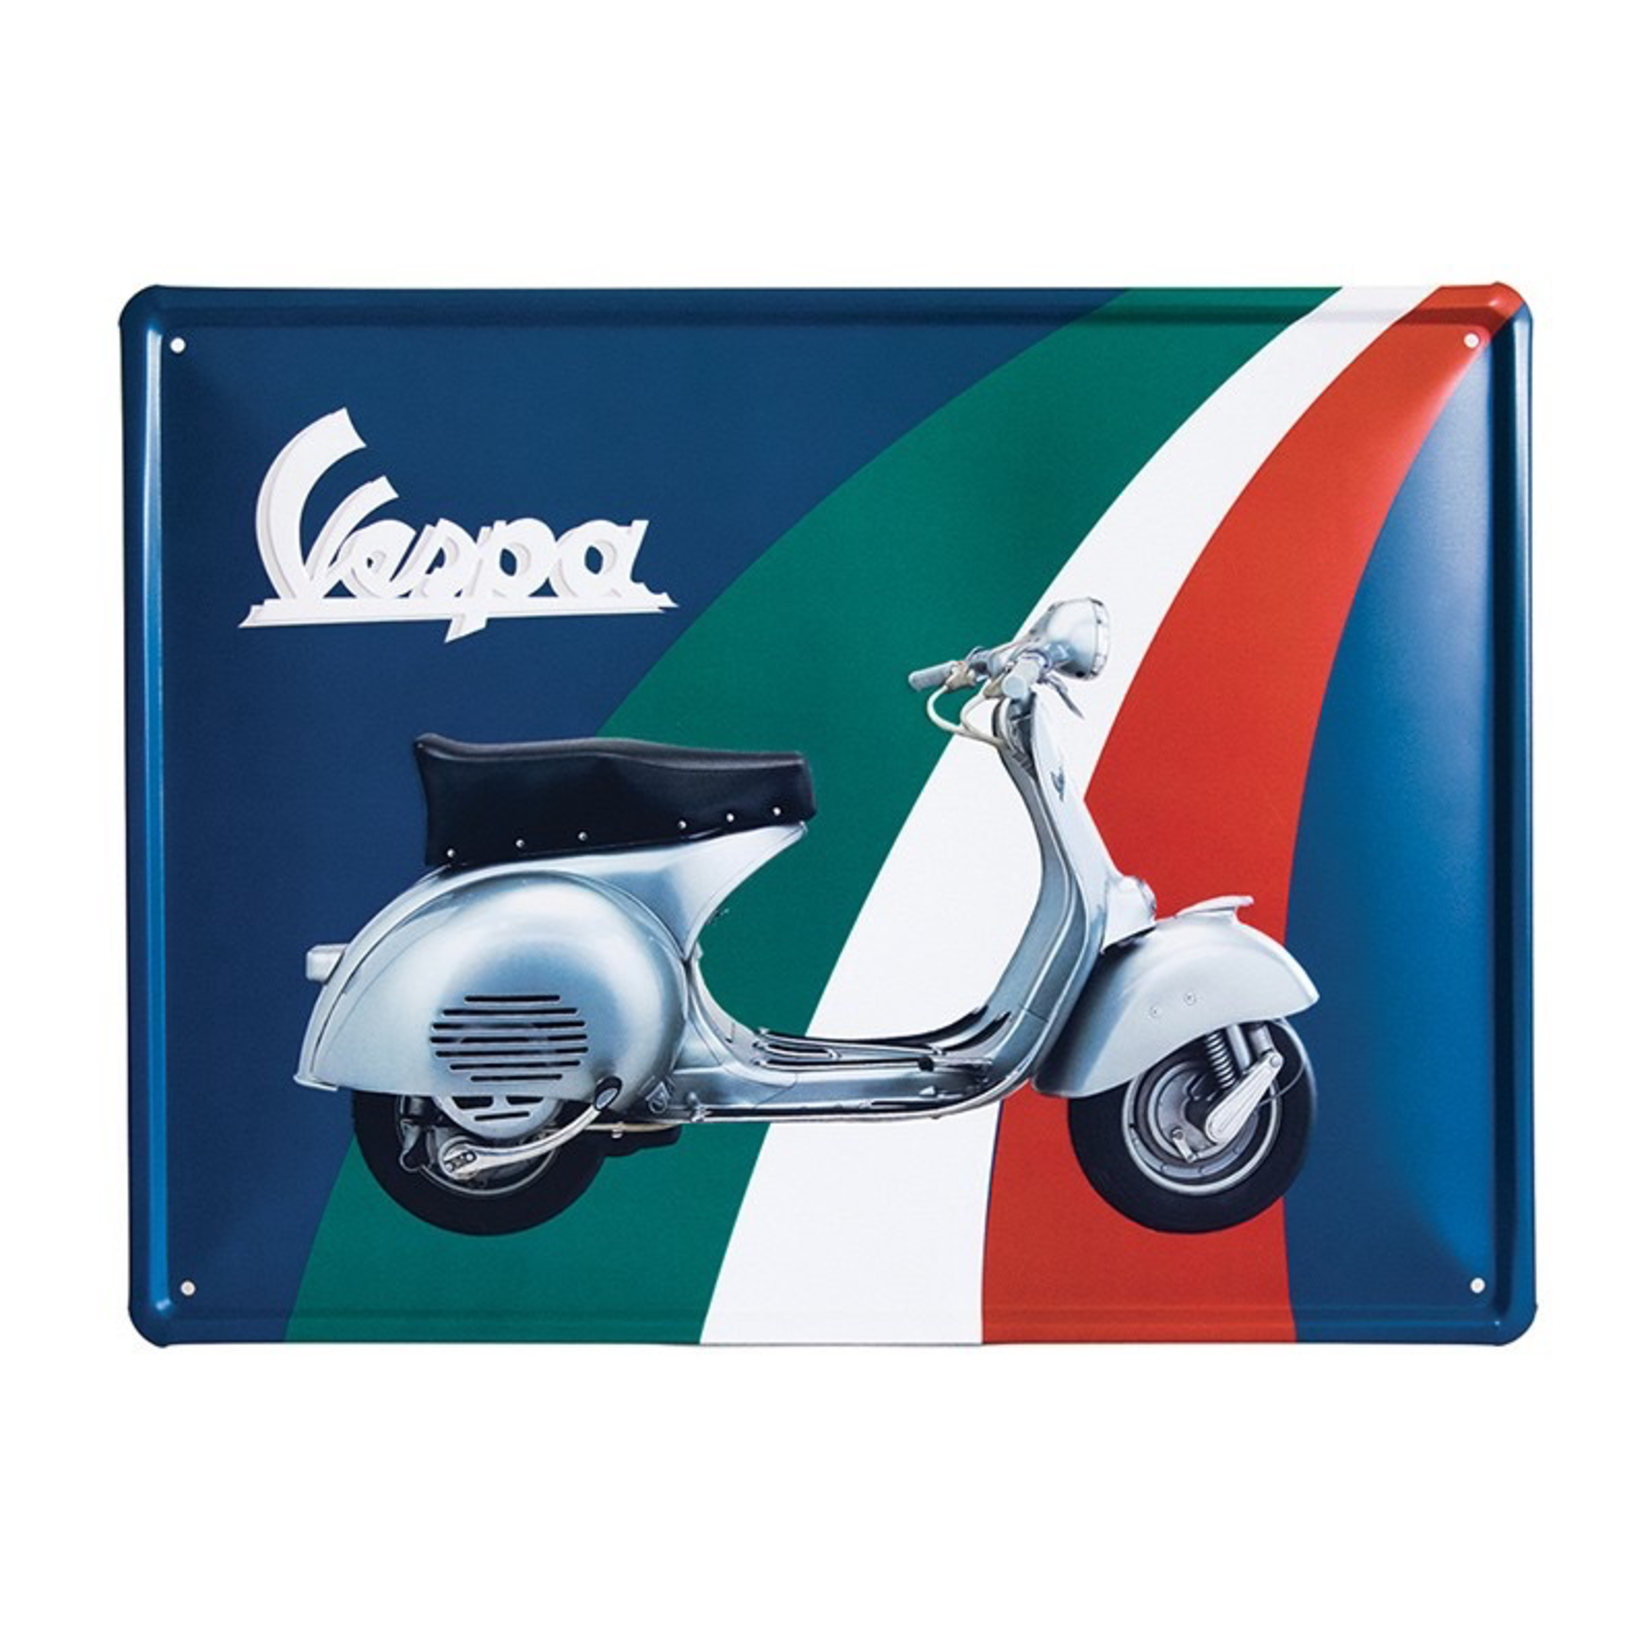 Lifestyle Sign, Metal Vespa Tricolore Green/White/Red Rectangular